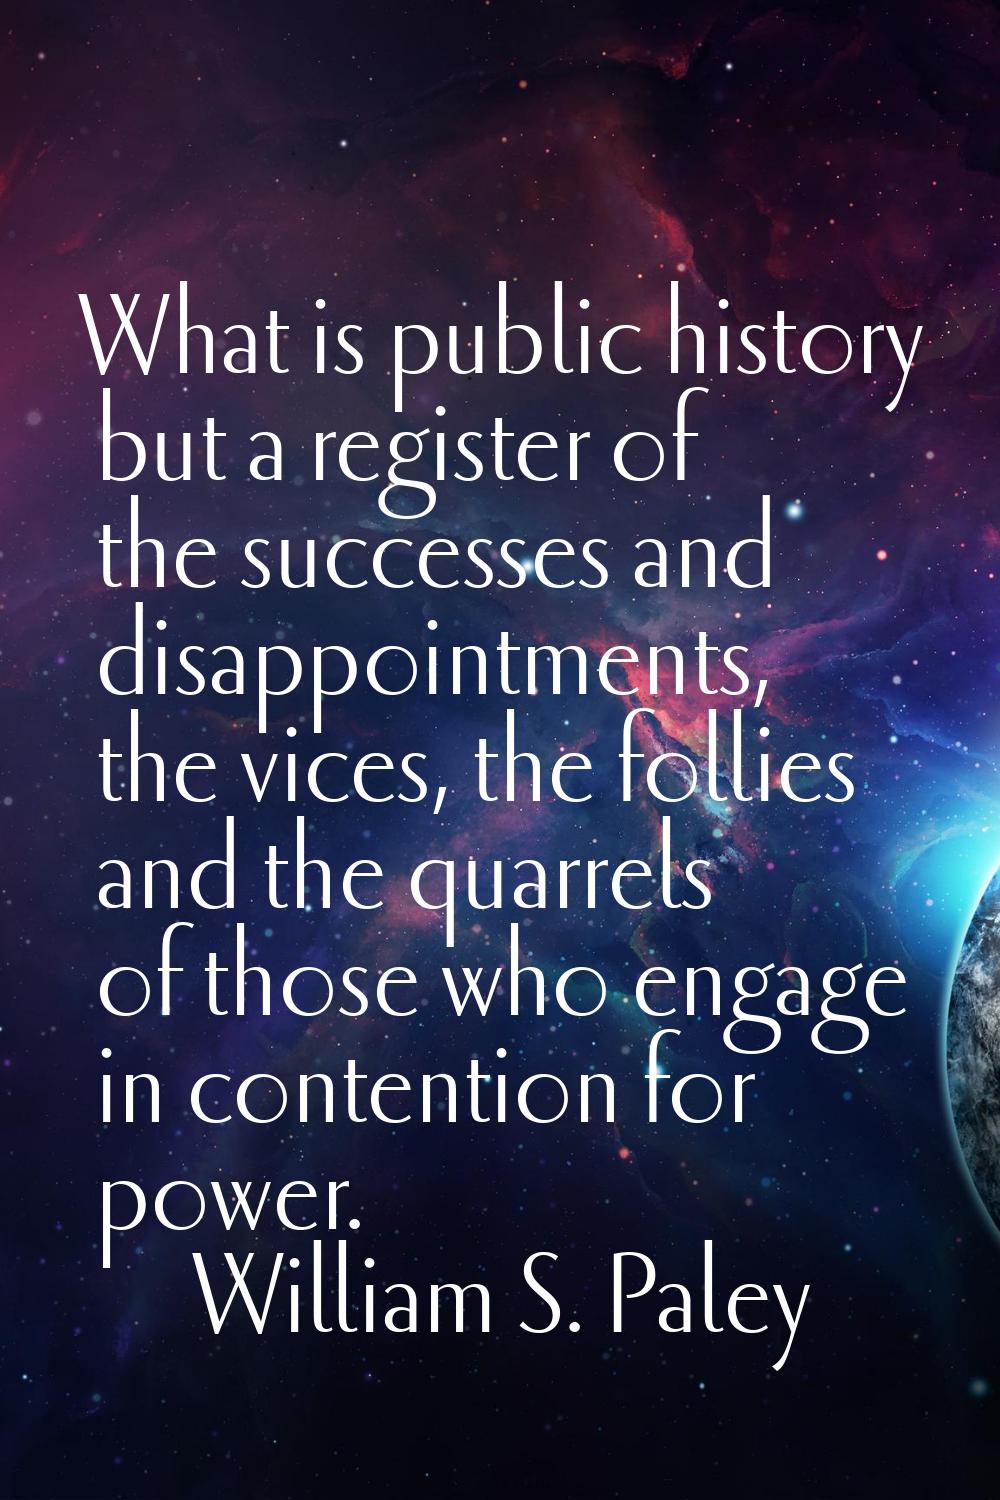 What is public history but a register of the successes and disappointments, the vices, the follies 